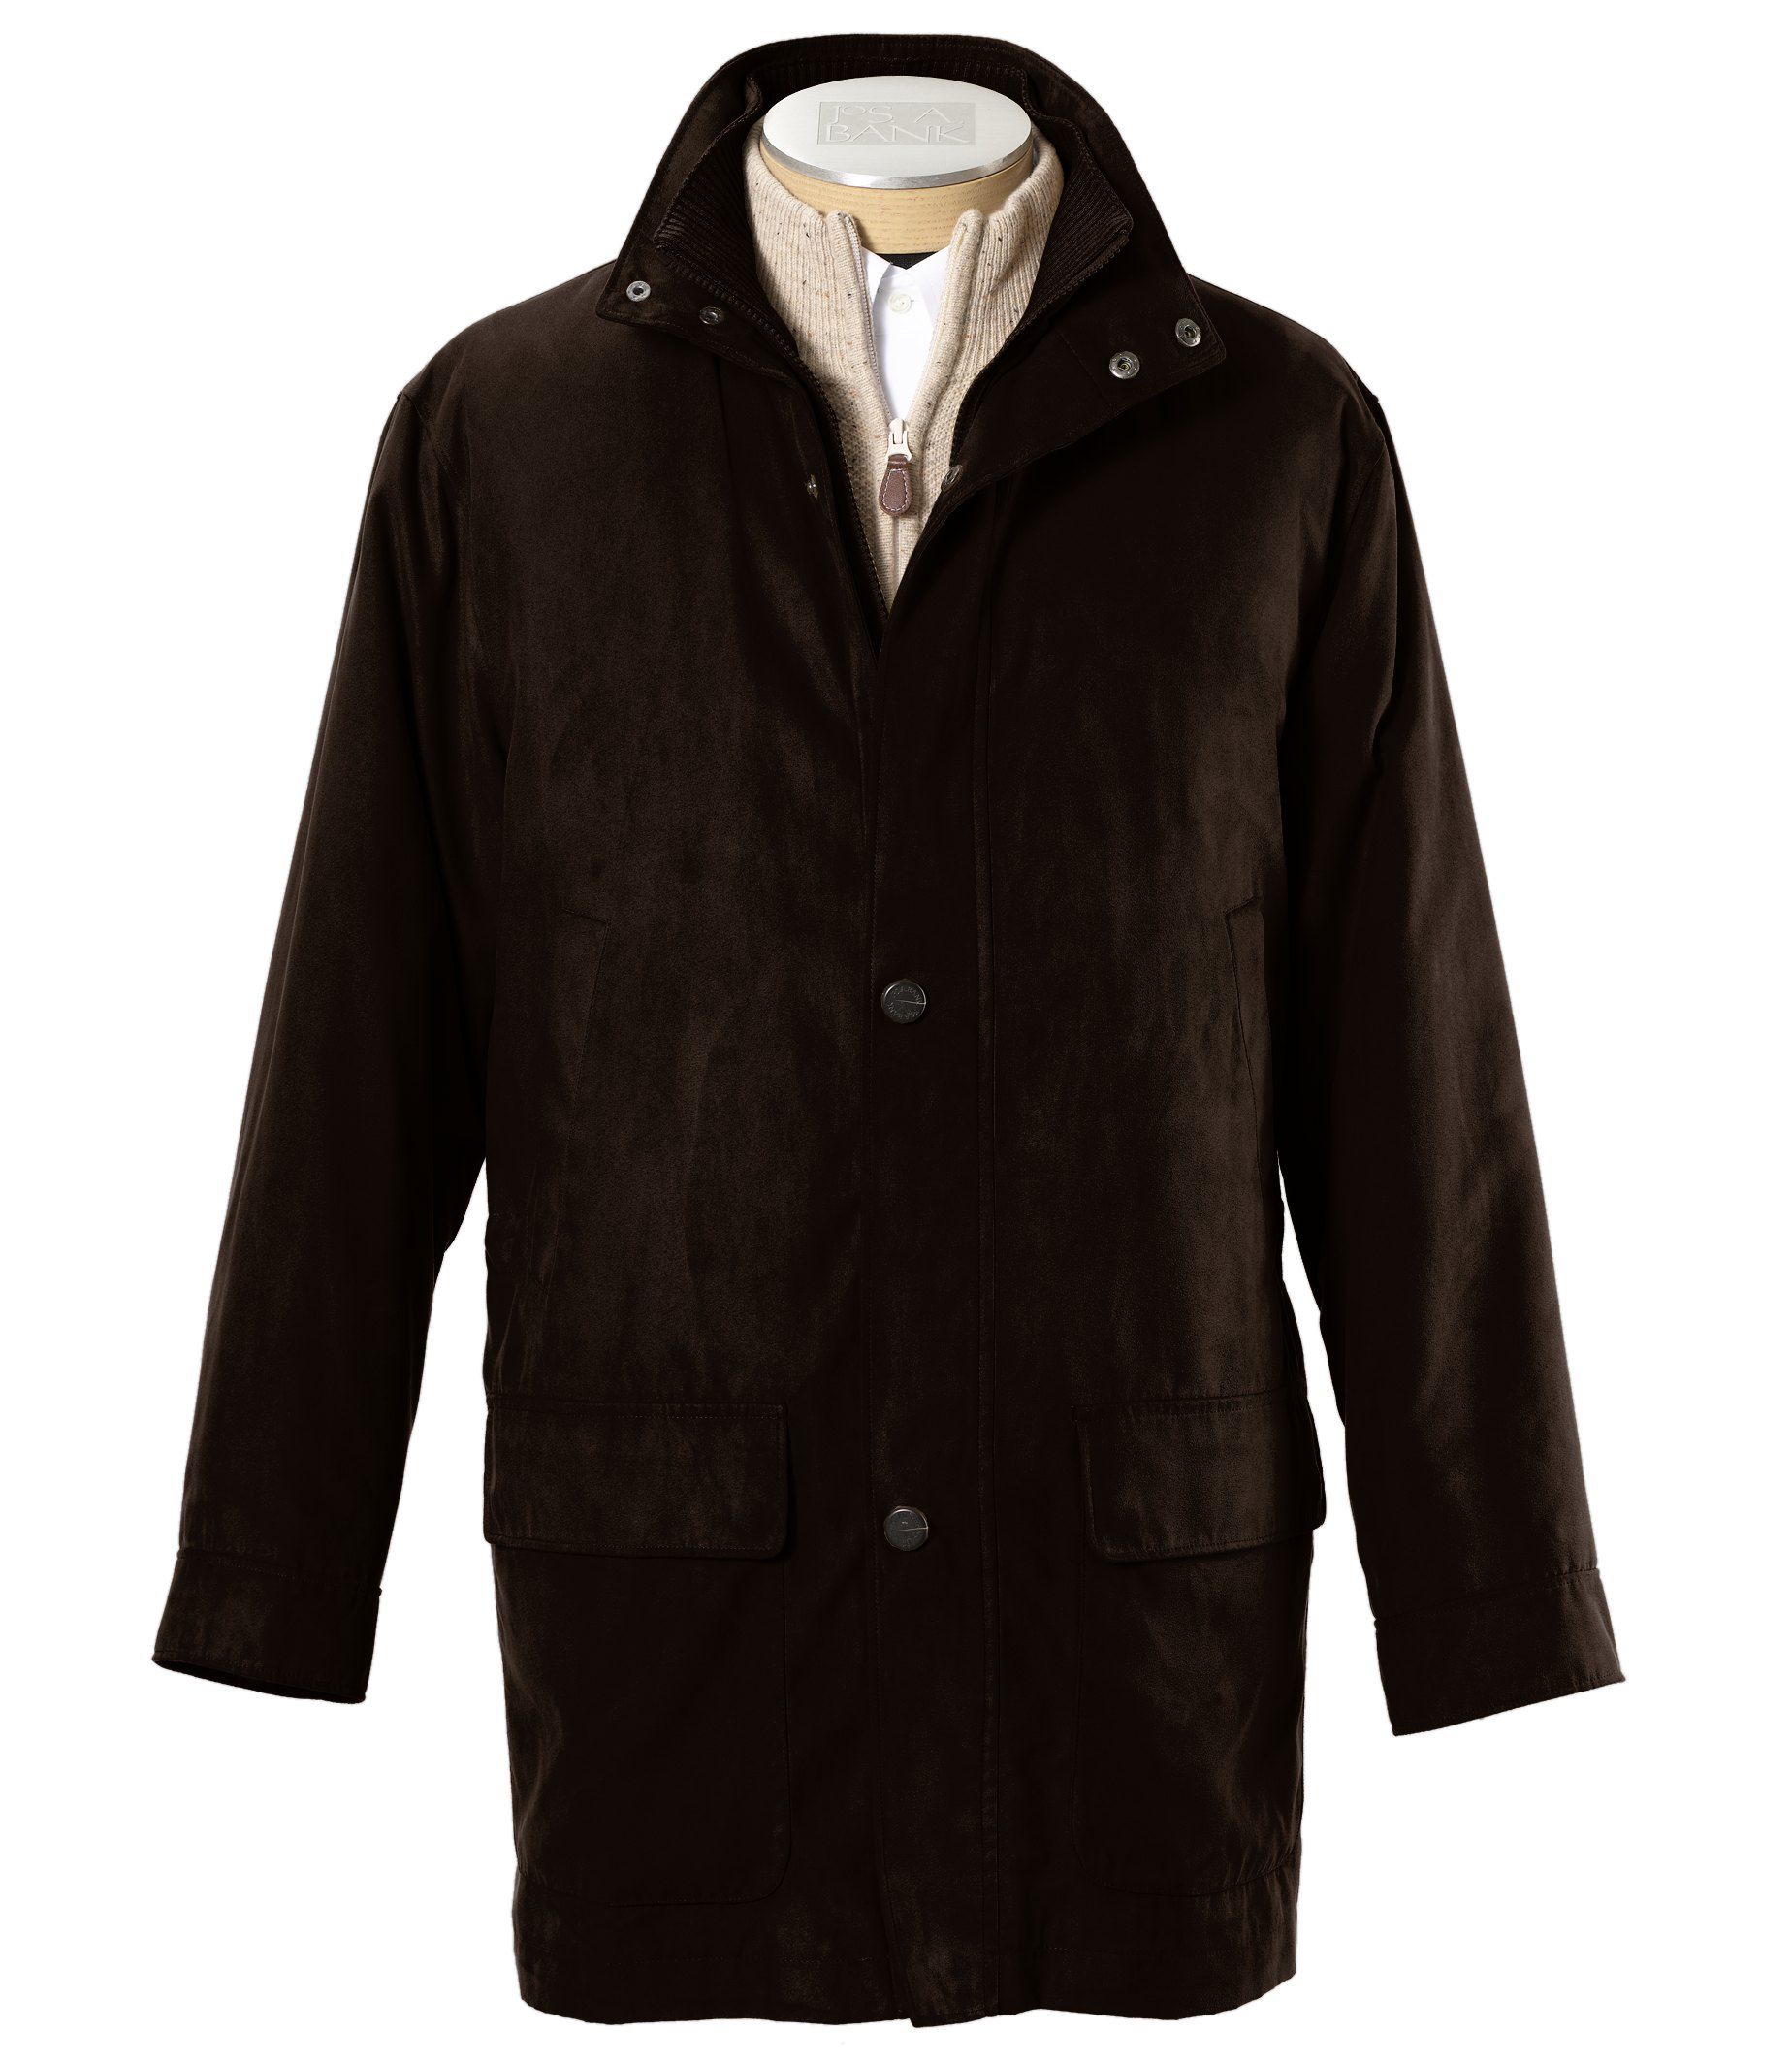 Micro-suede Zip-out Three-quarter Length Jacket | Snapcat